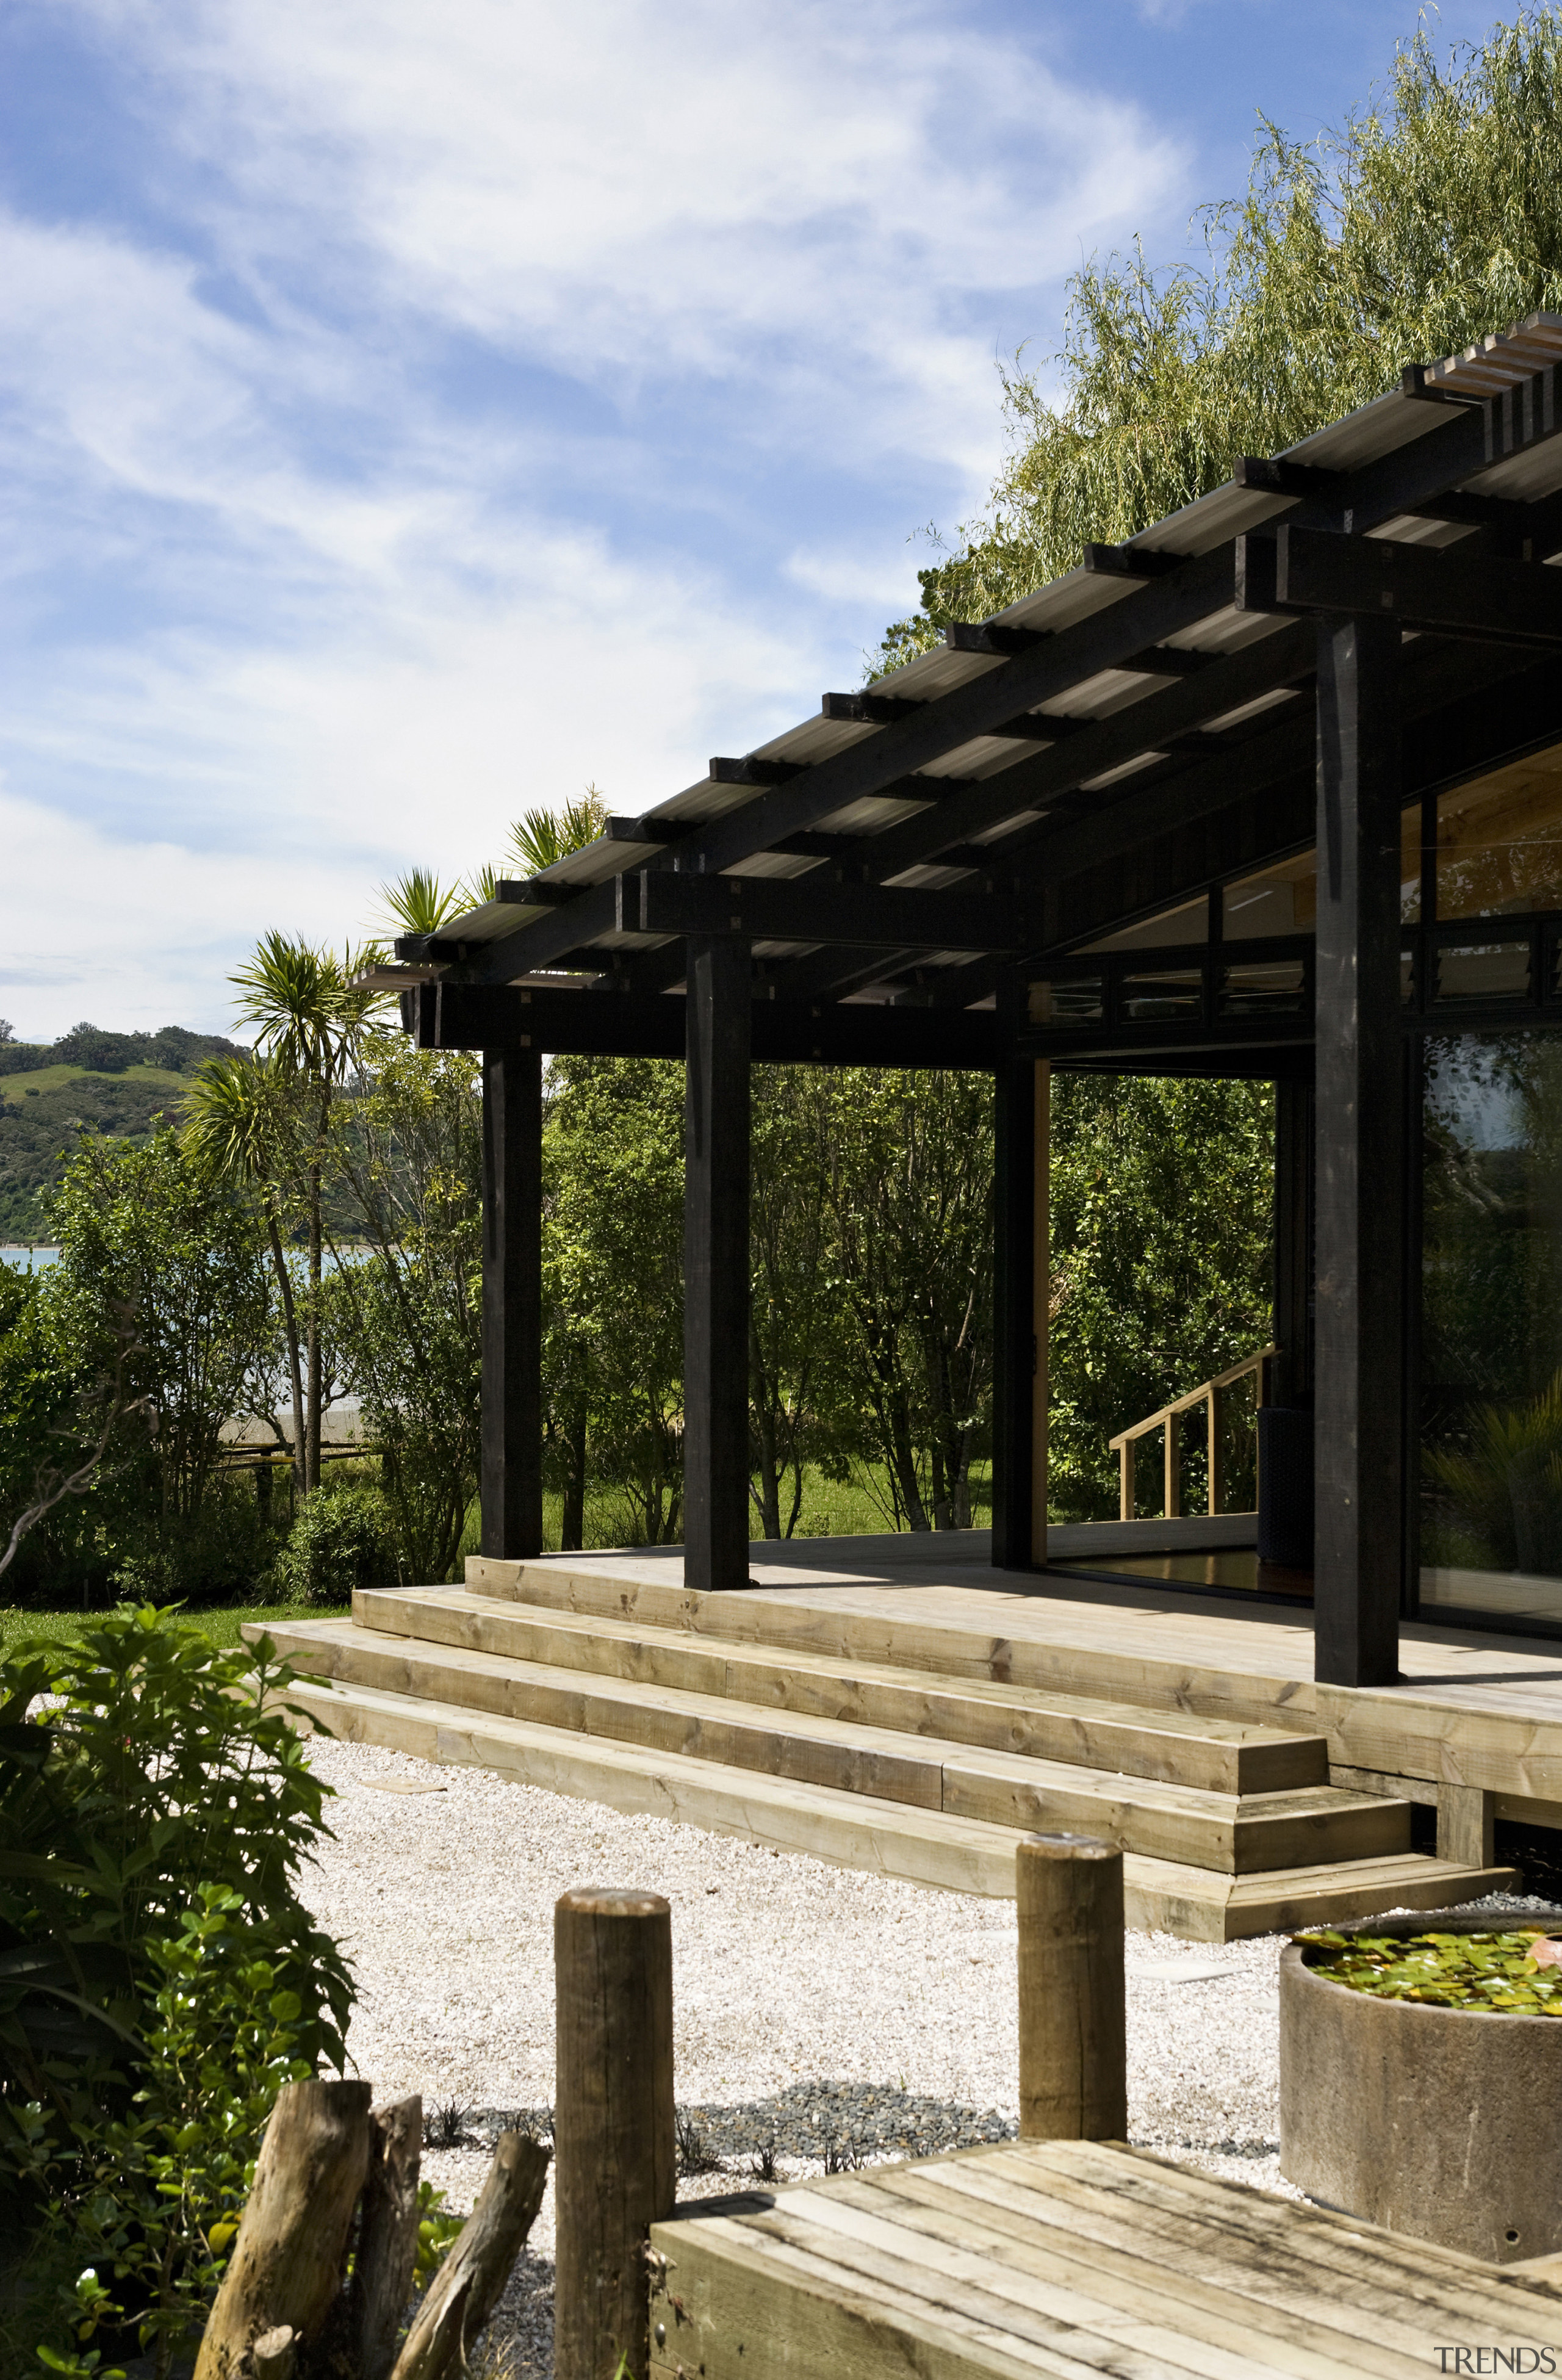 The timber for this house is treated with outdoor structure, pergola, sky, walkway, wood, white, black